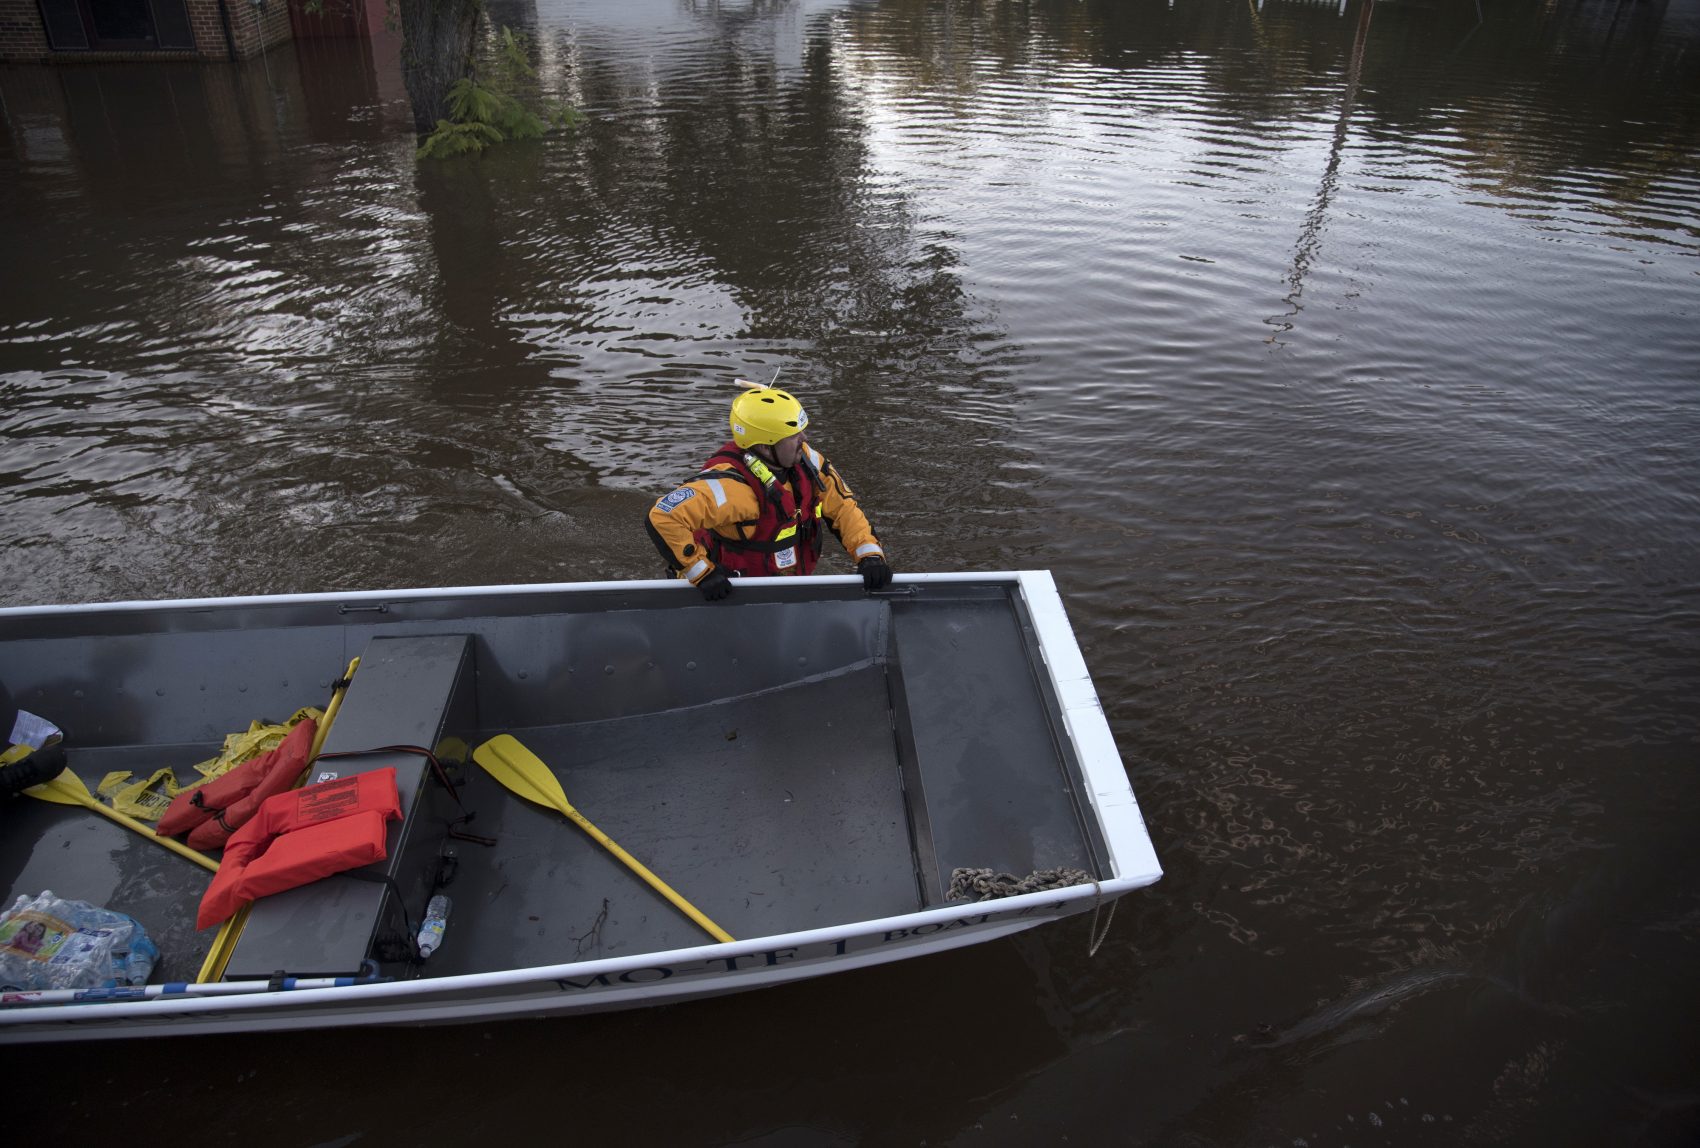 A swift water rescue team member guides a boat through floodwaters caused by rain from Hurricane Matthew in Lumberton, N.C., Monday, Oct. 10, 2016. (Mike Spencer/AP)